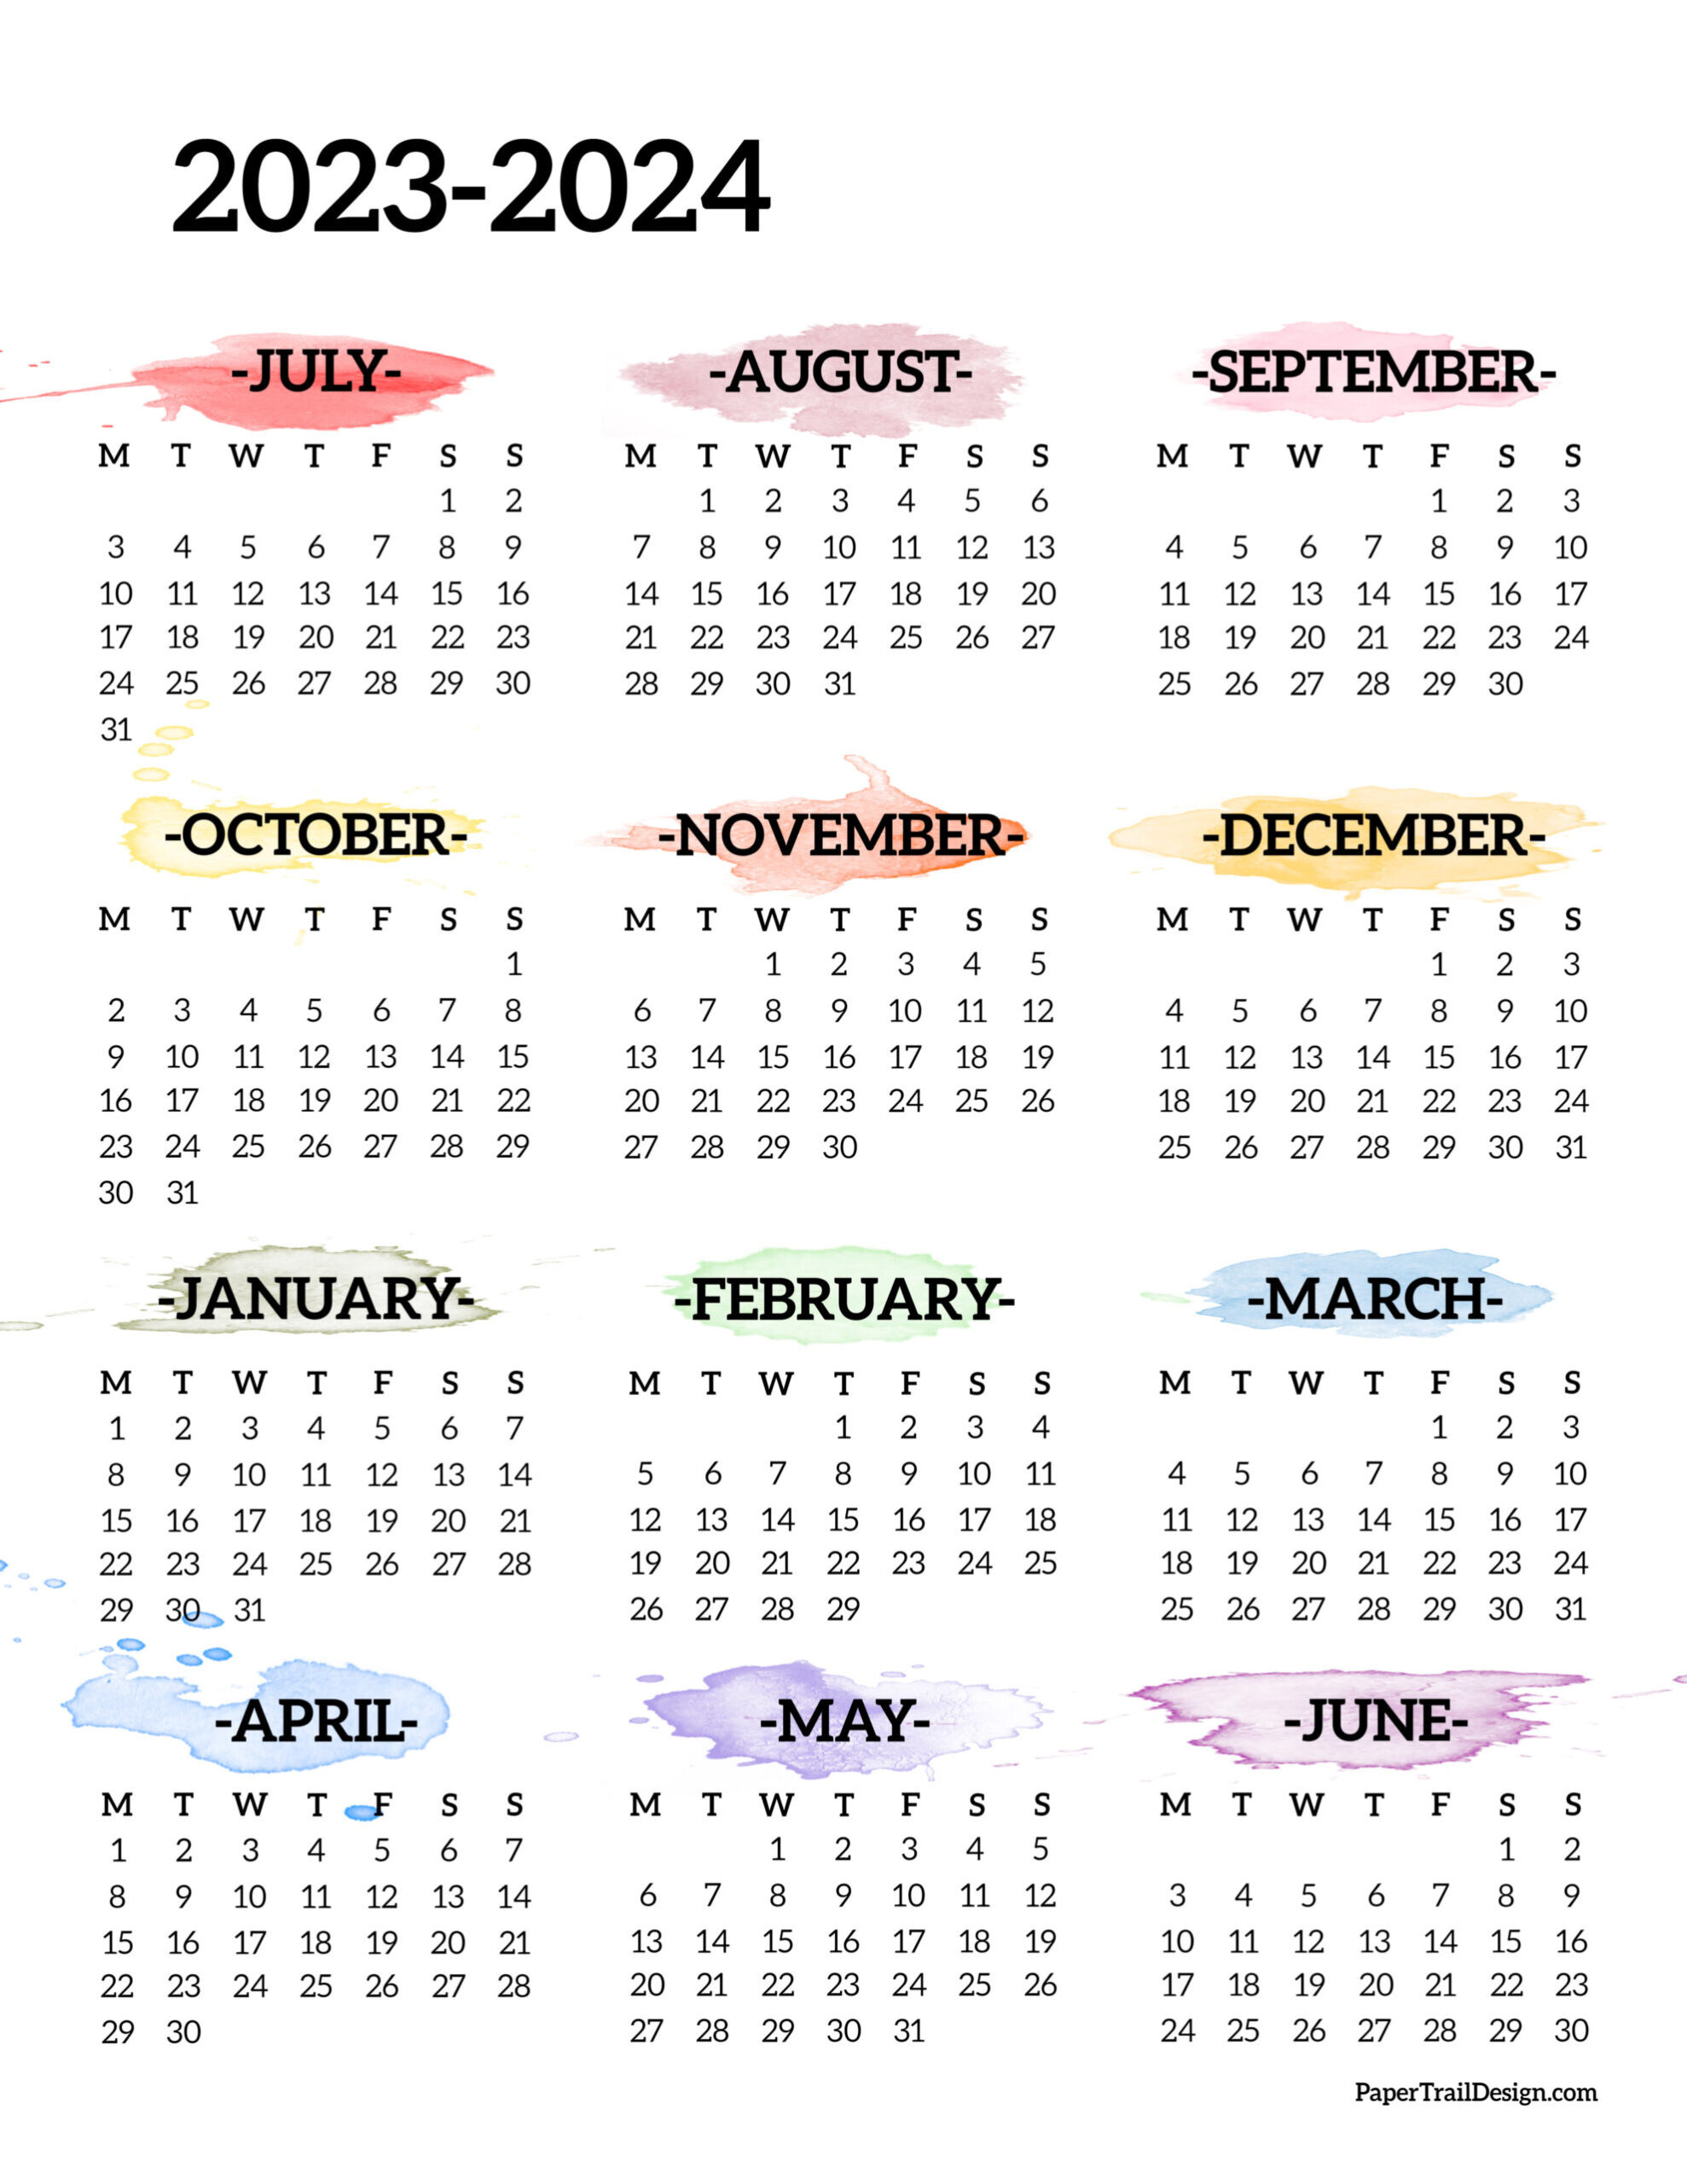 2023-2024 School Year Calendar Free Printable - Paper Trail Design throughout Calendar From August 2023 To June 2024